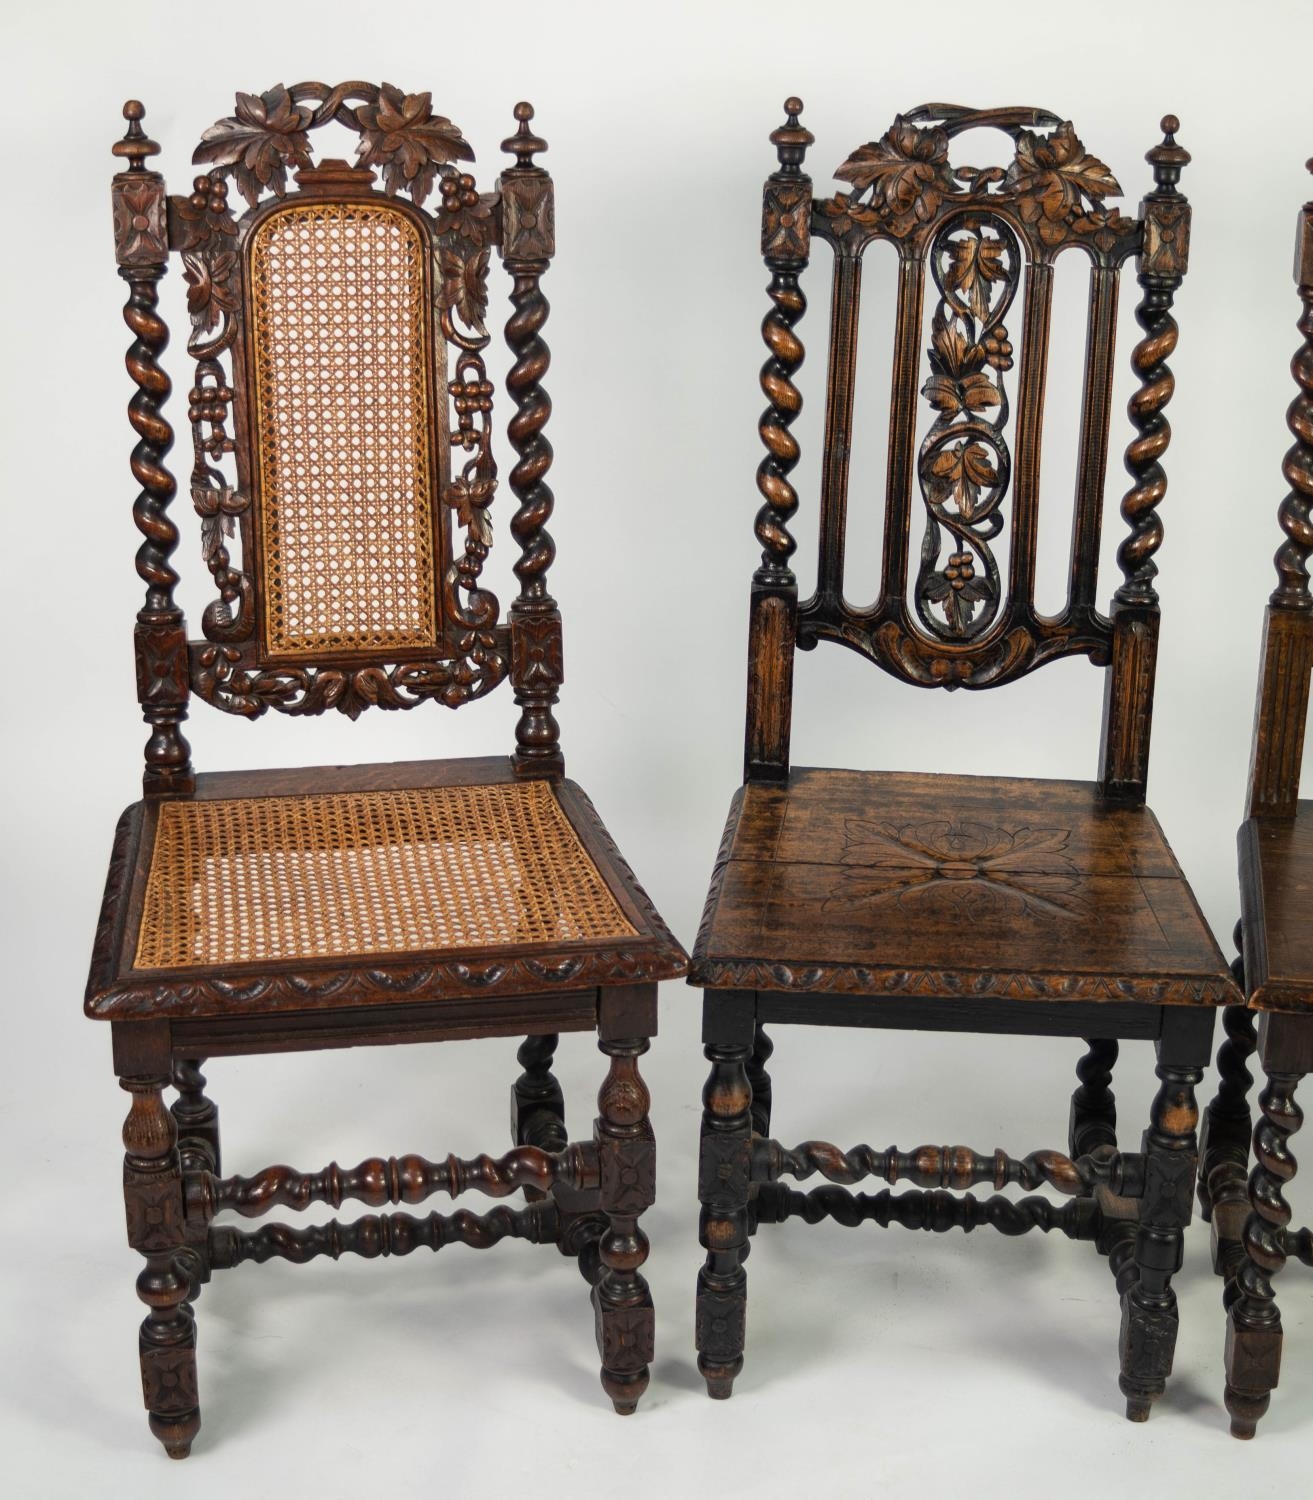 PAIR OF NINETEENTH CENTURY CARVED OAK SINGLE CHAIRS IN THE SEVENTEENTH CENTURY STYLE, each with - Image 2 of 3